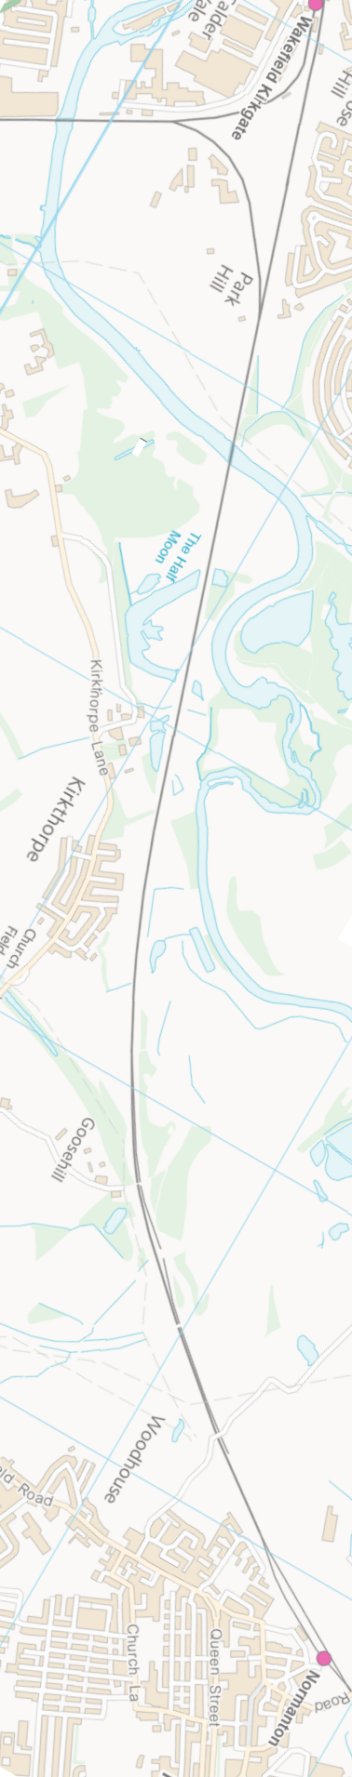 Section from Ordnance Survey OpenSource mapping 2013 showing L&YR railway line from Wakefield Kirkgate to Normanton railway station